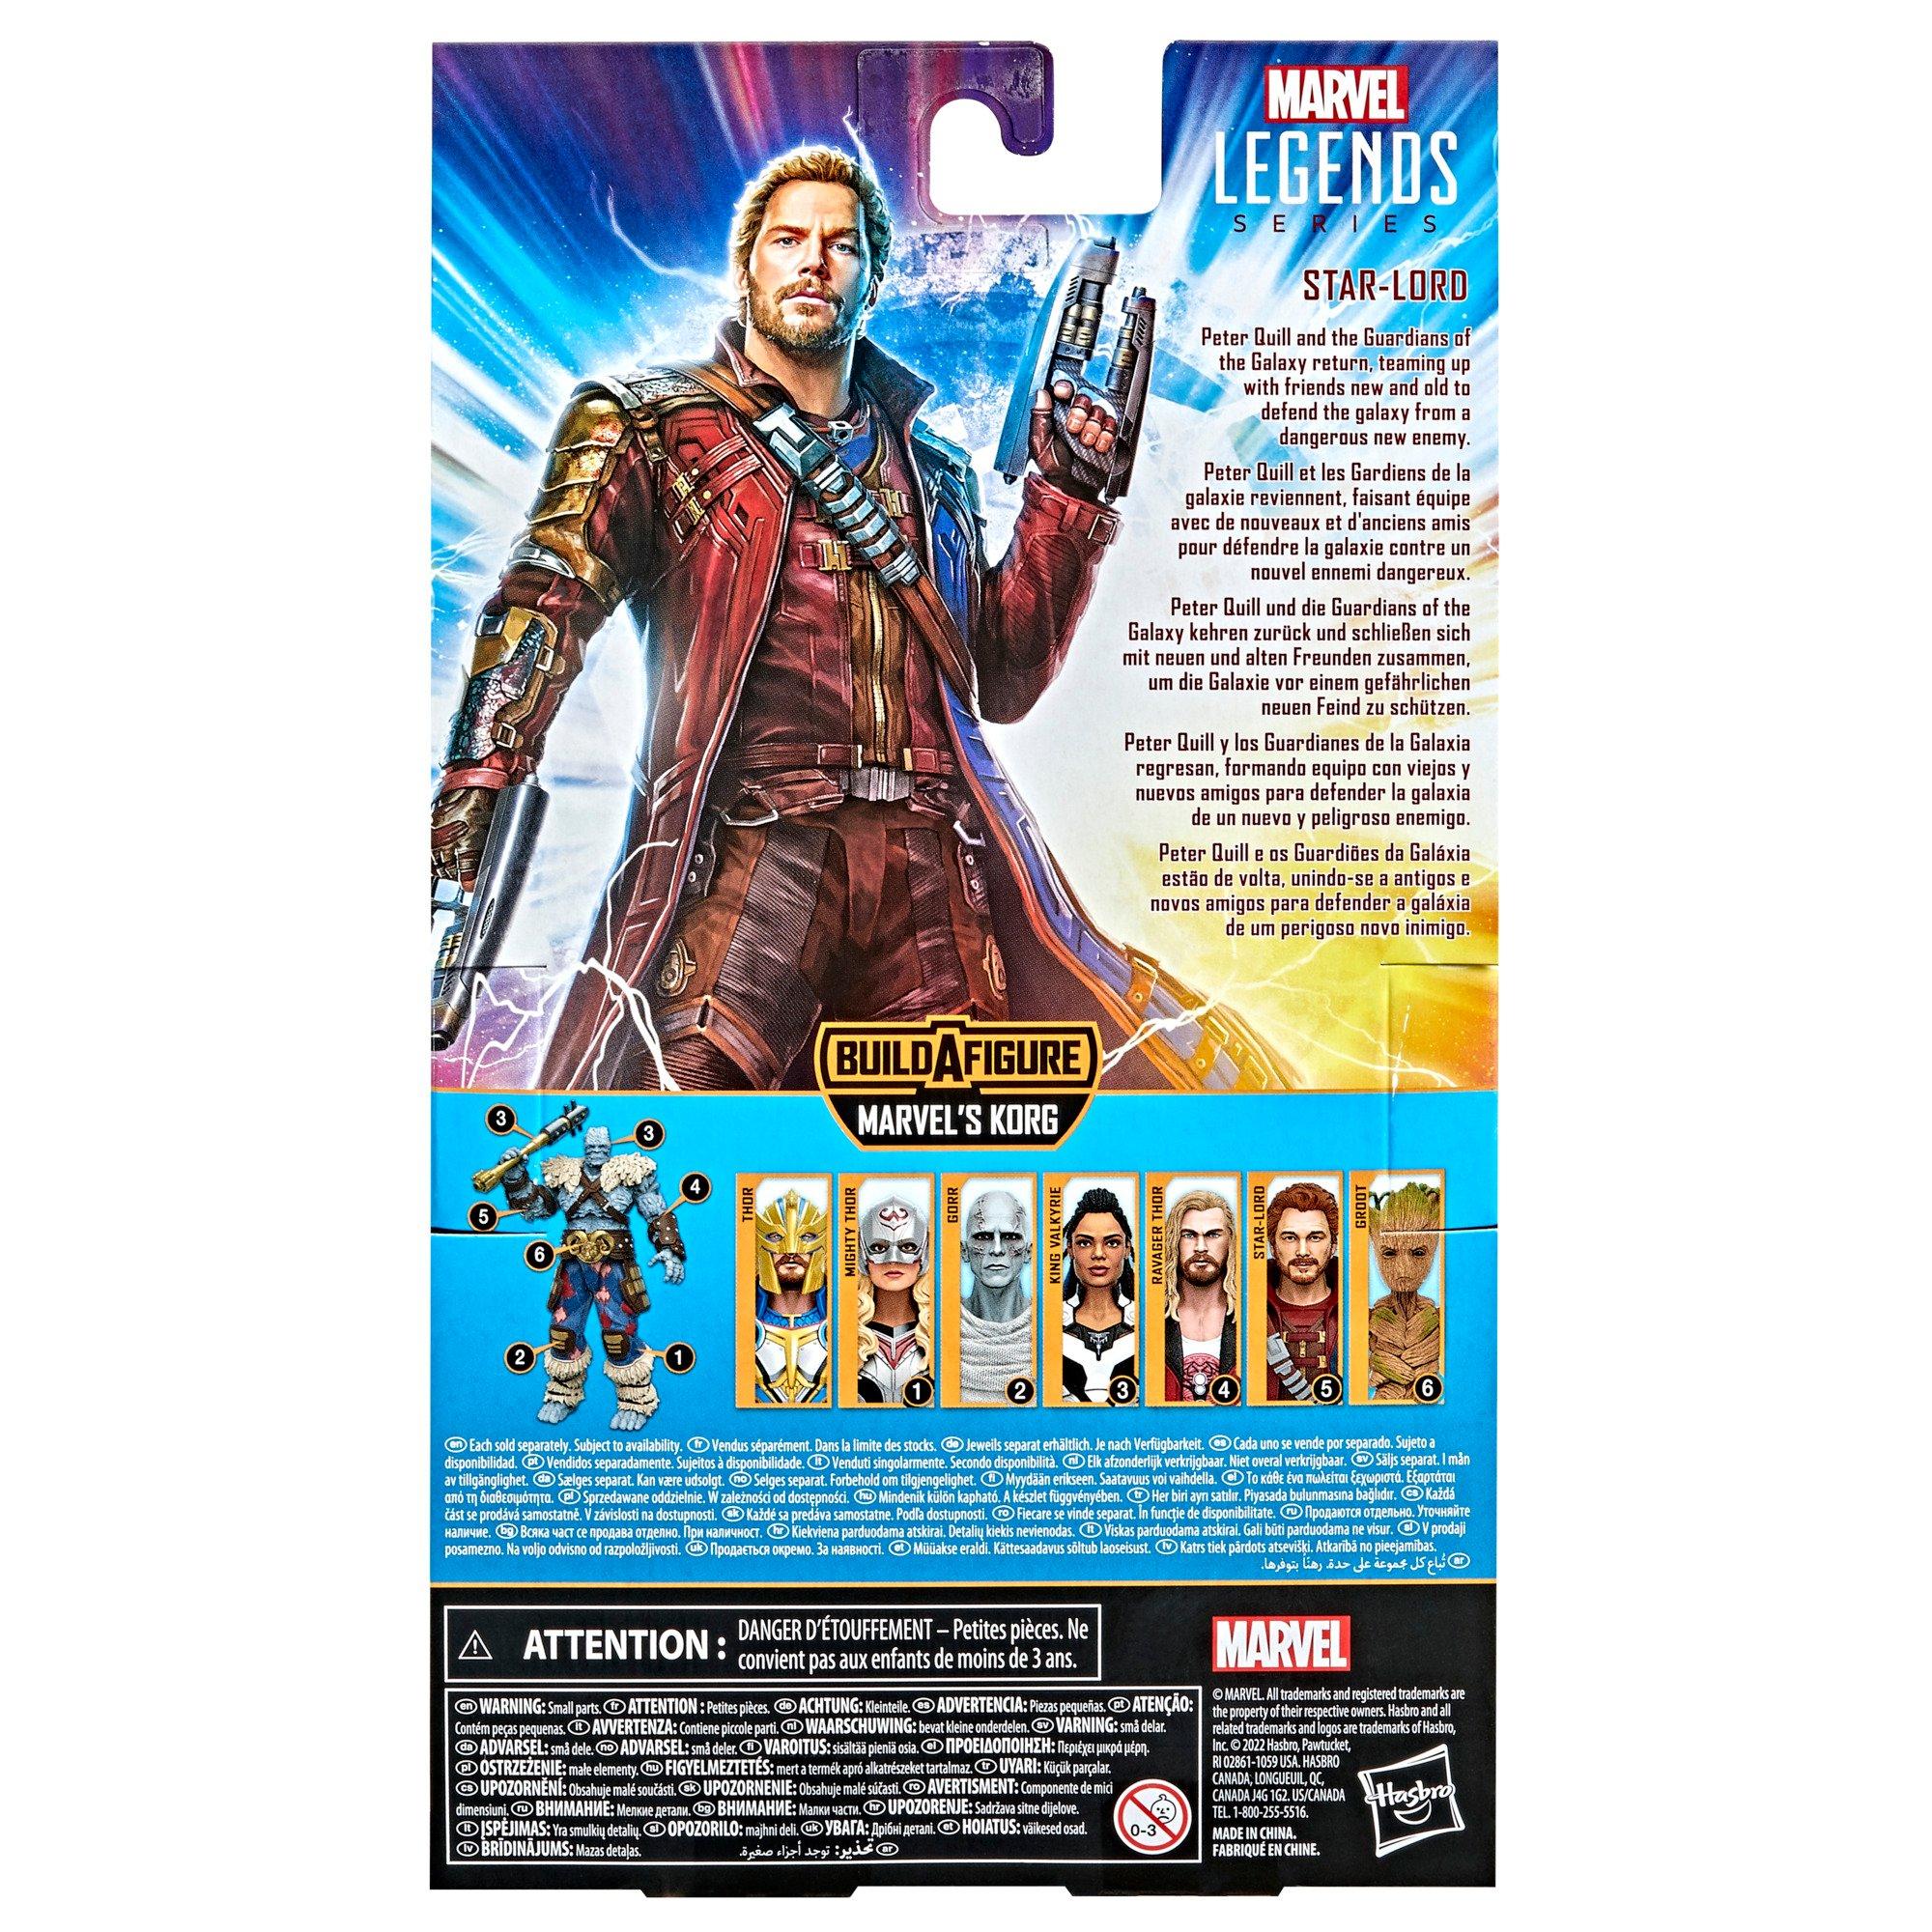 Hasbro Marvel Guardians of The Galaxy 6-inch Legends Series Star-Lord 